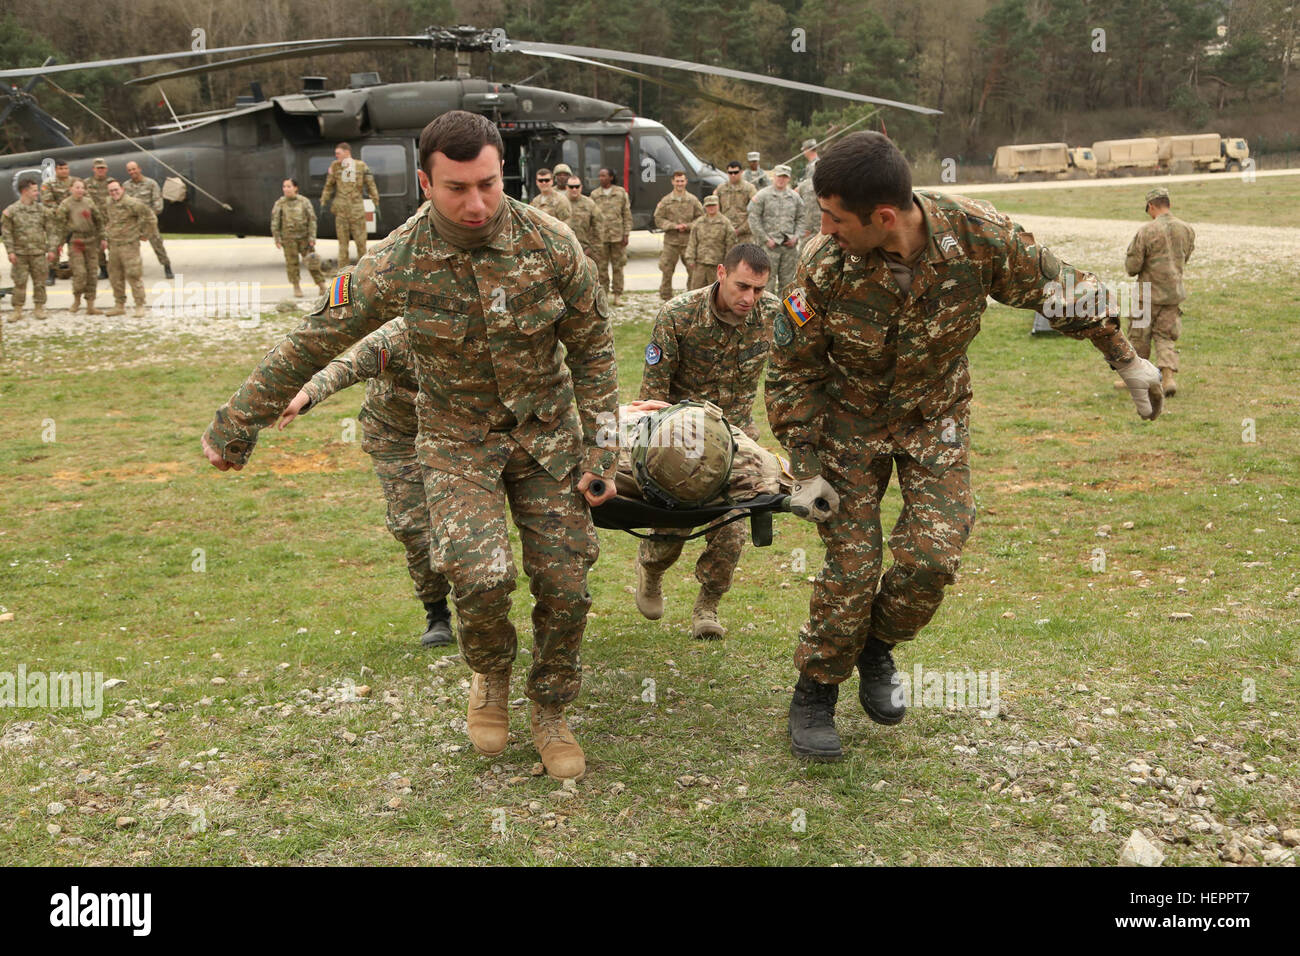 Armenian soldiers carry a simulated wounded soldier while conducting medical evacuation training during exercise Saber Junction 16 at the U.S. Army’s Joint Multinational Readiness Center (JMRC) in Hohenfels, Germany, April 9, 2016. Saber Junction 16 is the U.S. Army Europe’s 173rd Airborne Brigade’s combat training center certification exercise, taking place at the JMRC in Hohenfels, Germany, Mar. 31-Apr. 24, 2016.  The exercise is designed to evaluate the readiness of the Army’s Europe-based combat brigades to conduct unified land operations and promote interoperability in a joint, multinatio Stock Photo